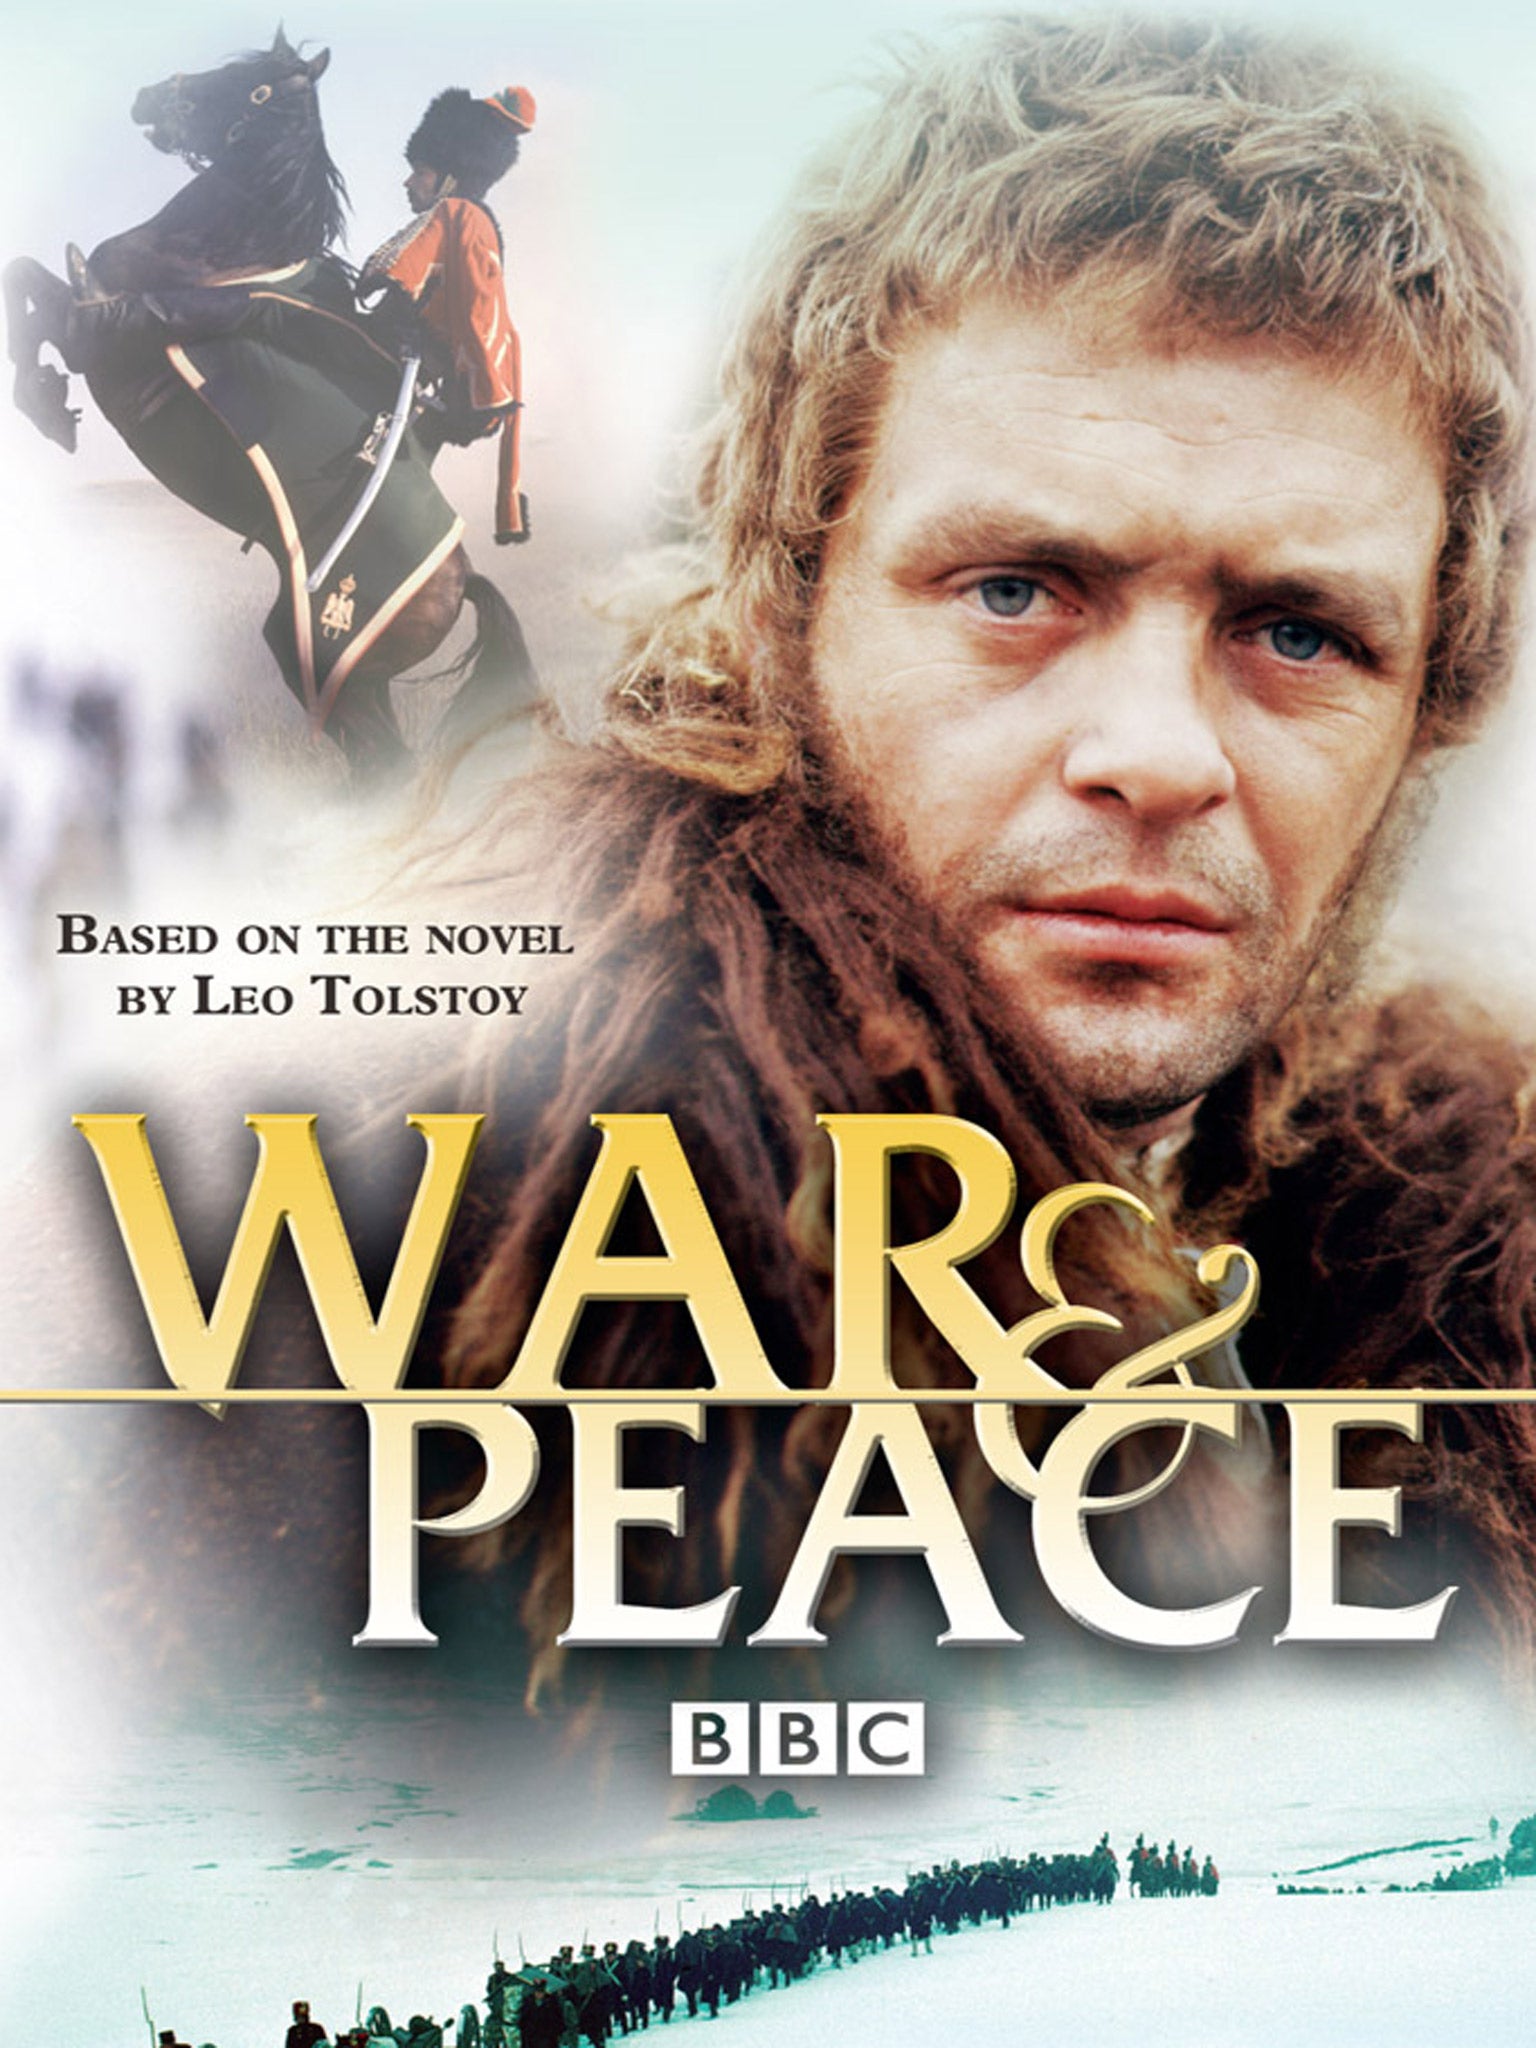 1974's BBC adaptation of 'War and Peace', starring Anthony Hopkins, consisted of 20 episodes